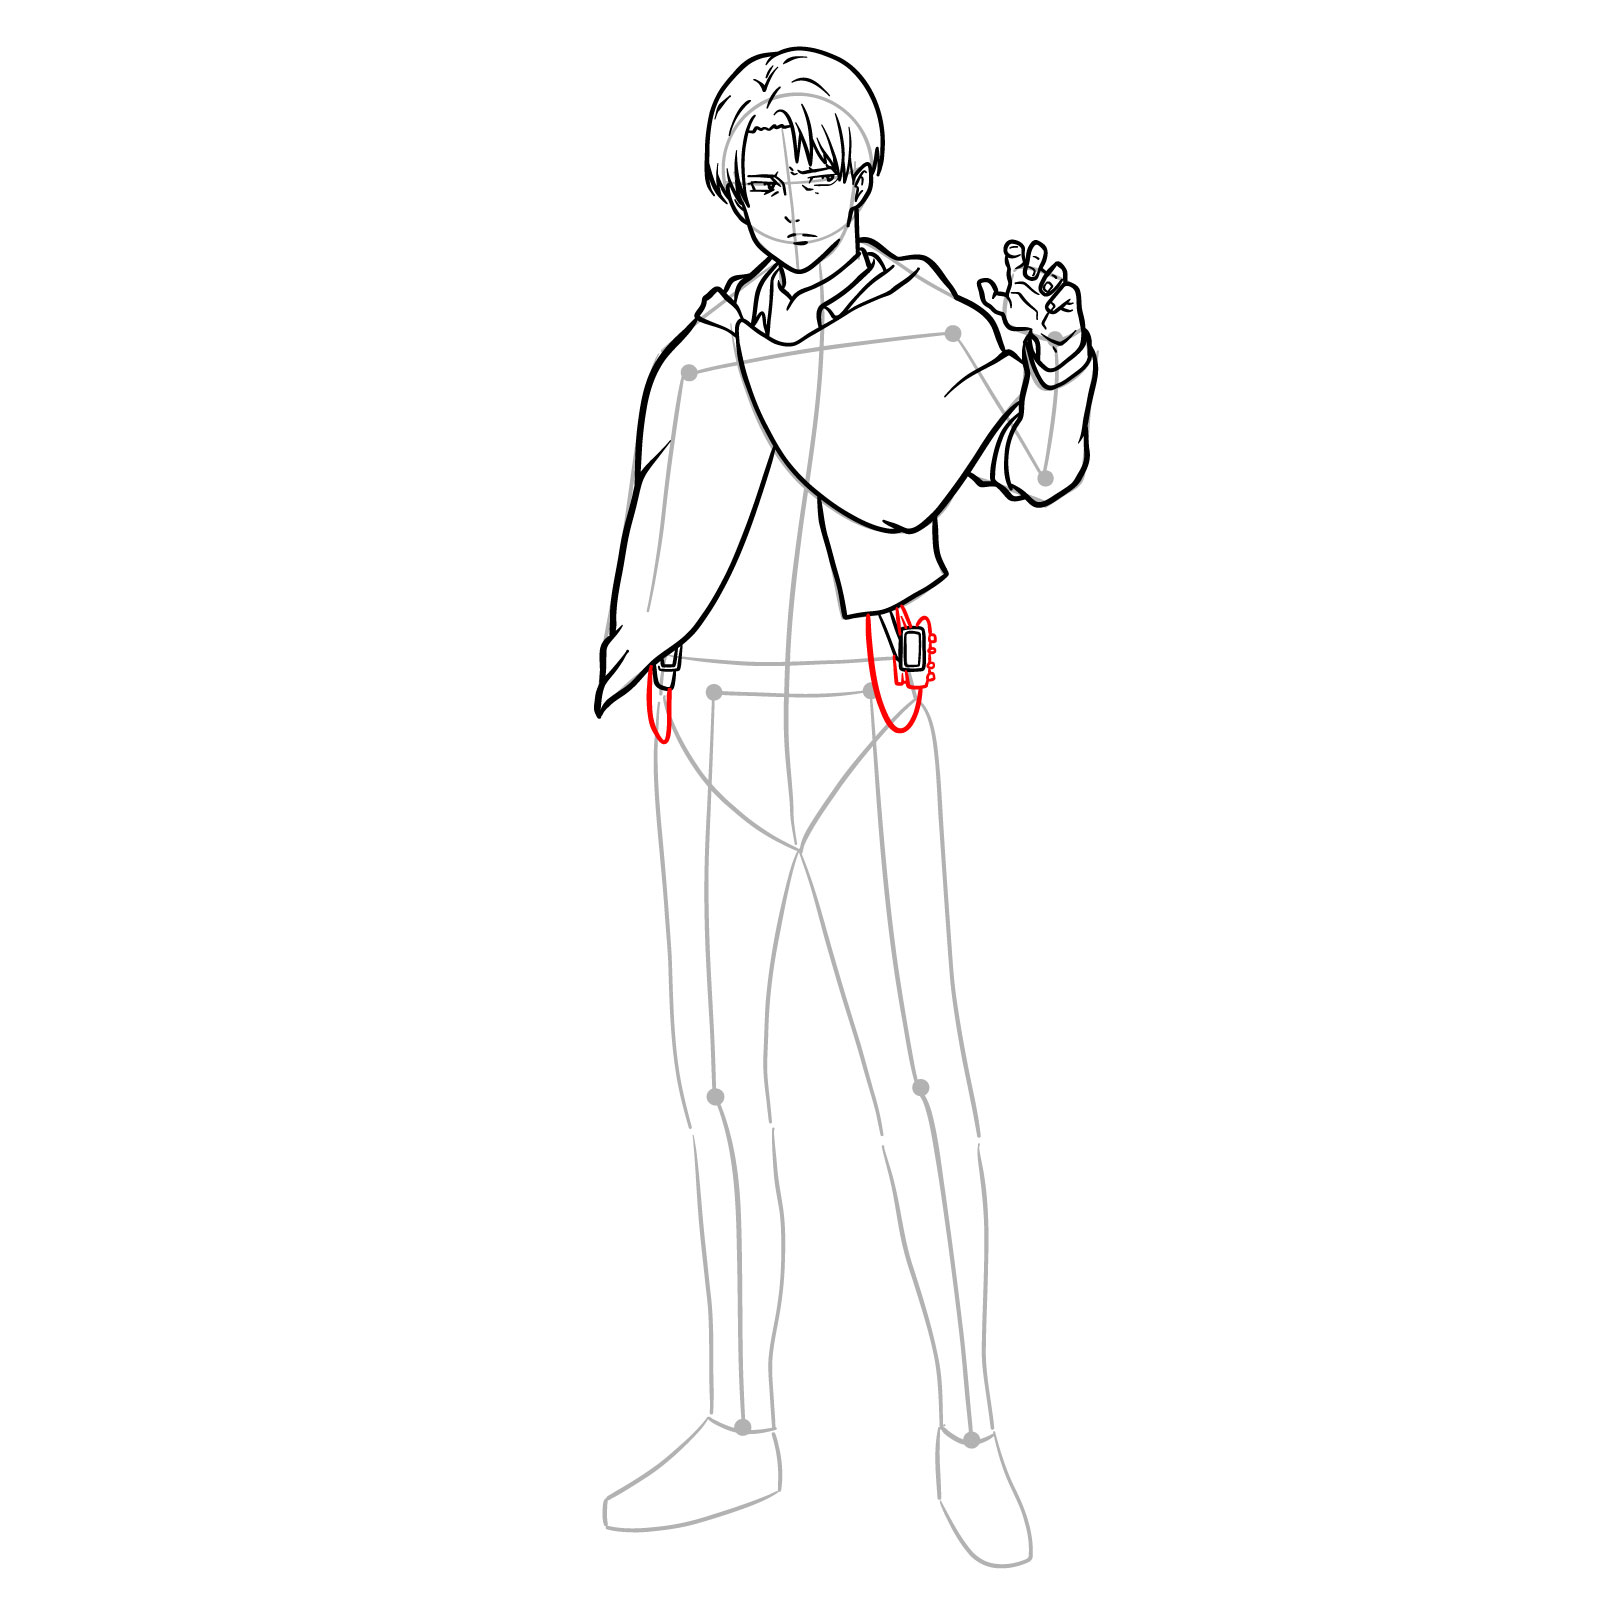 How to draw Captain Levi's jacket and utility belt details in a step-by-step full body drawing guide - step 16